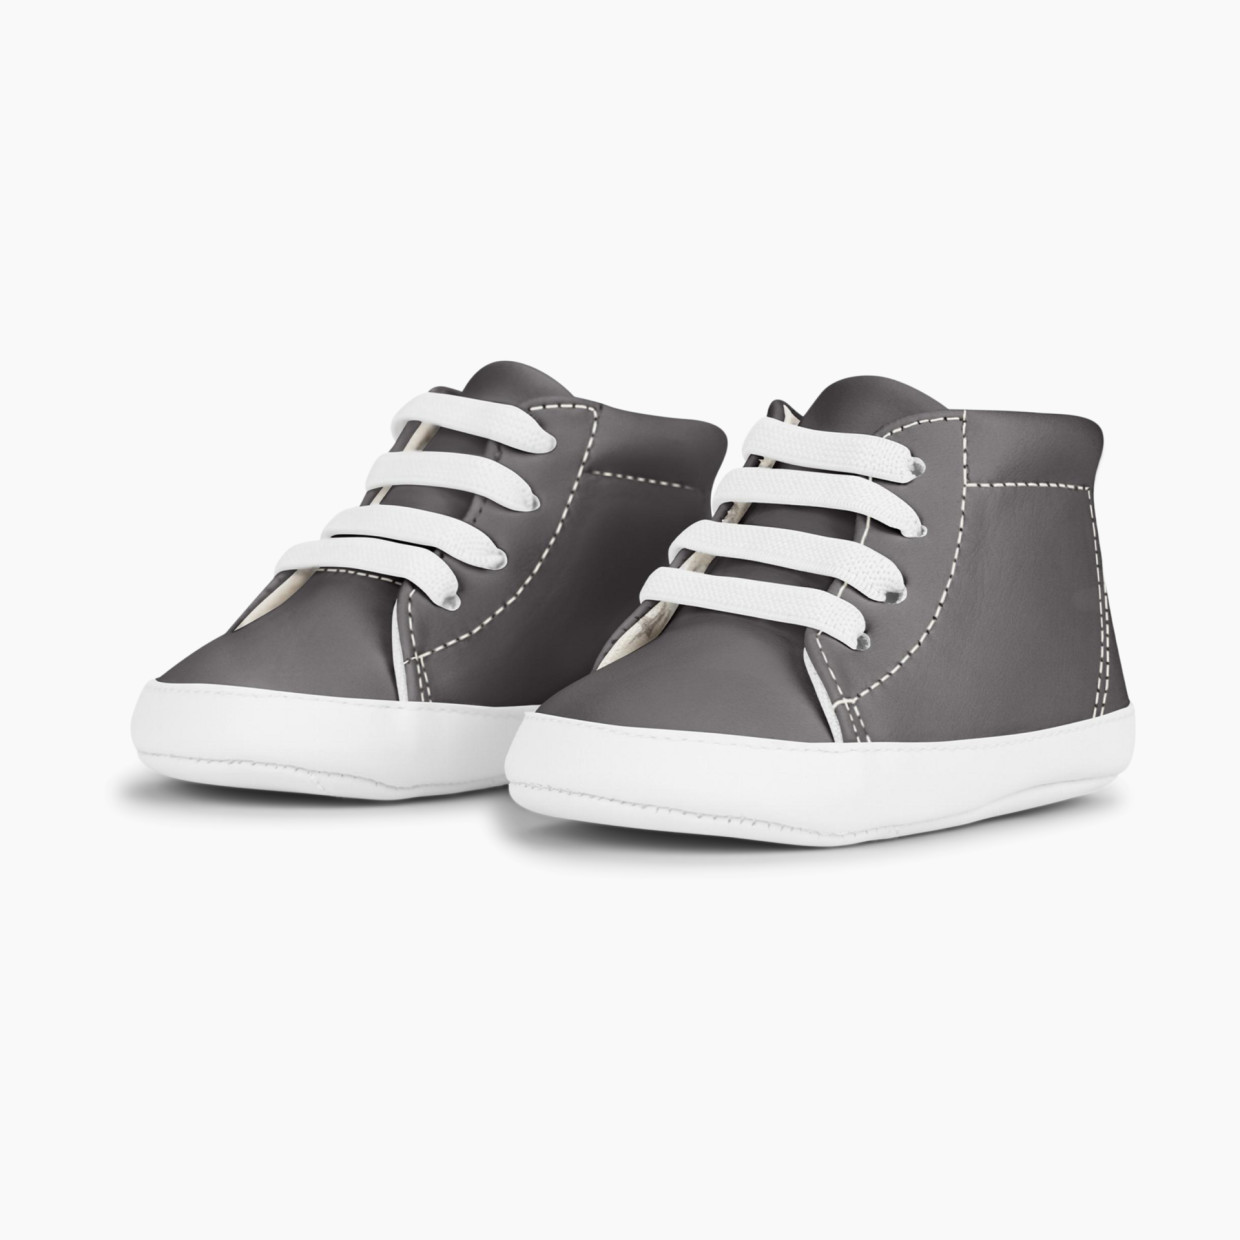 JUJUBE Eco Step Sneaker Shoes - Stormy Grey, 3-6.